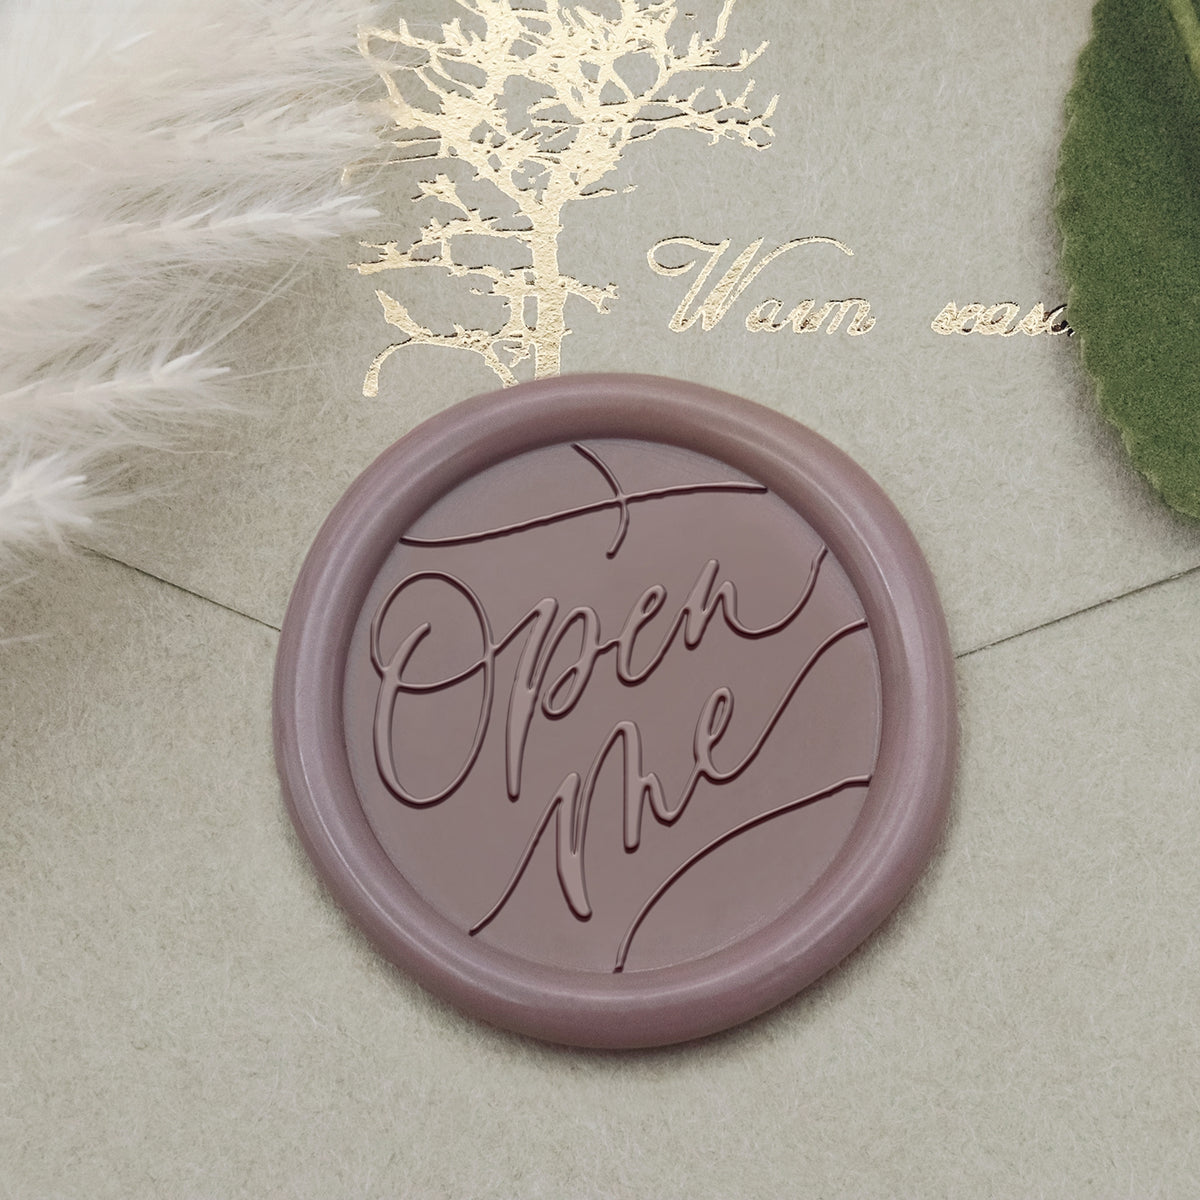 Stamprints Greeting Wax Seal Stamp - Open Me 1